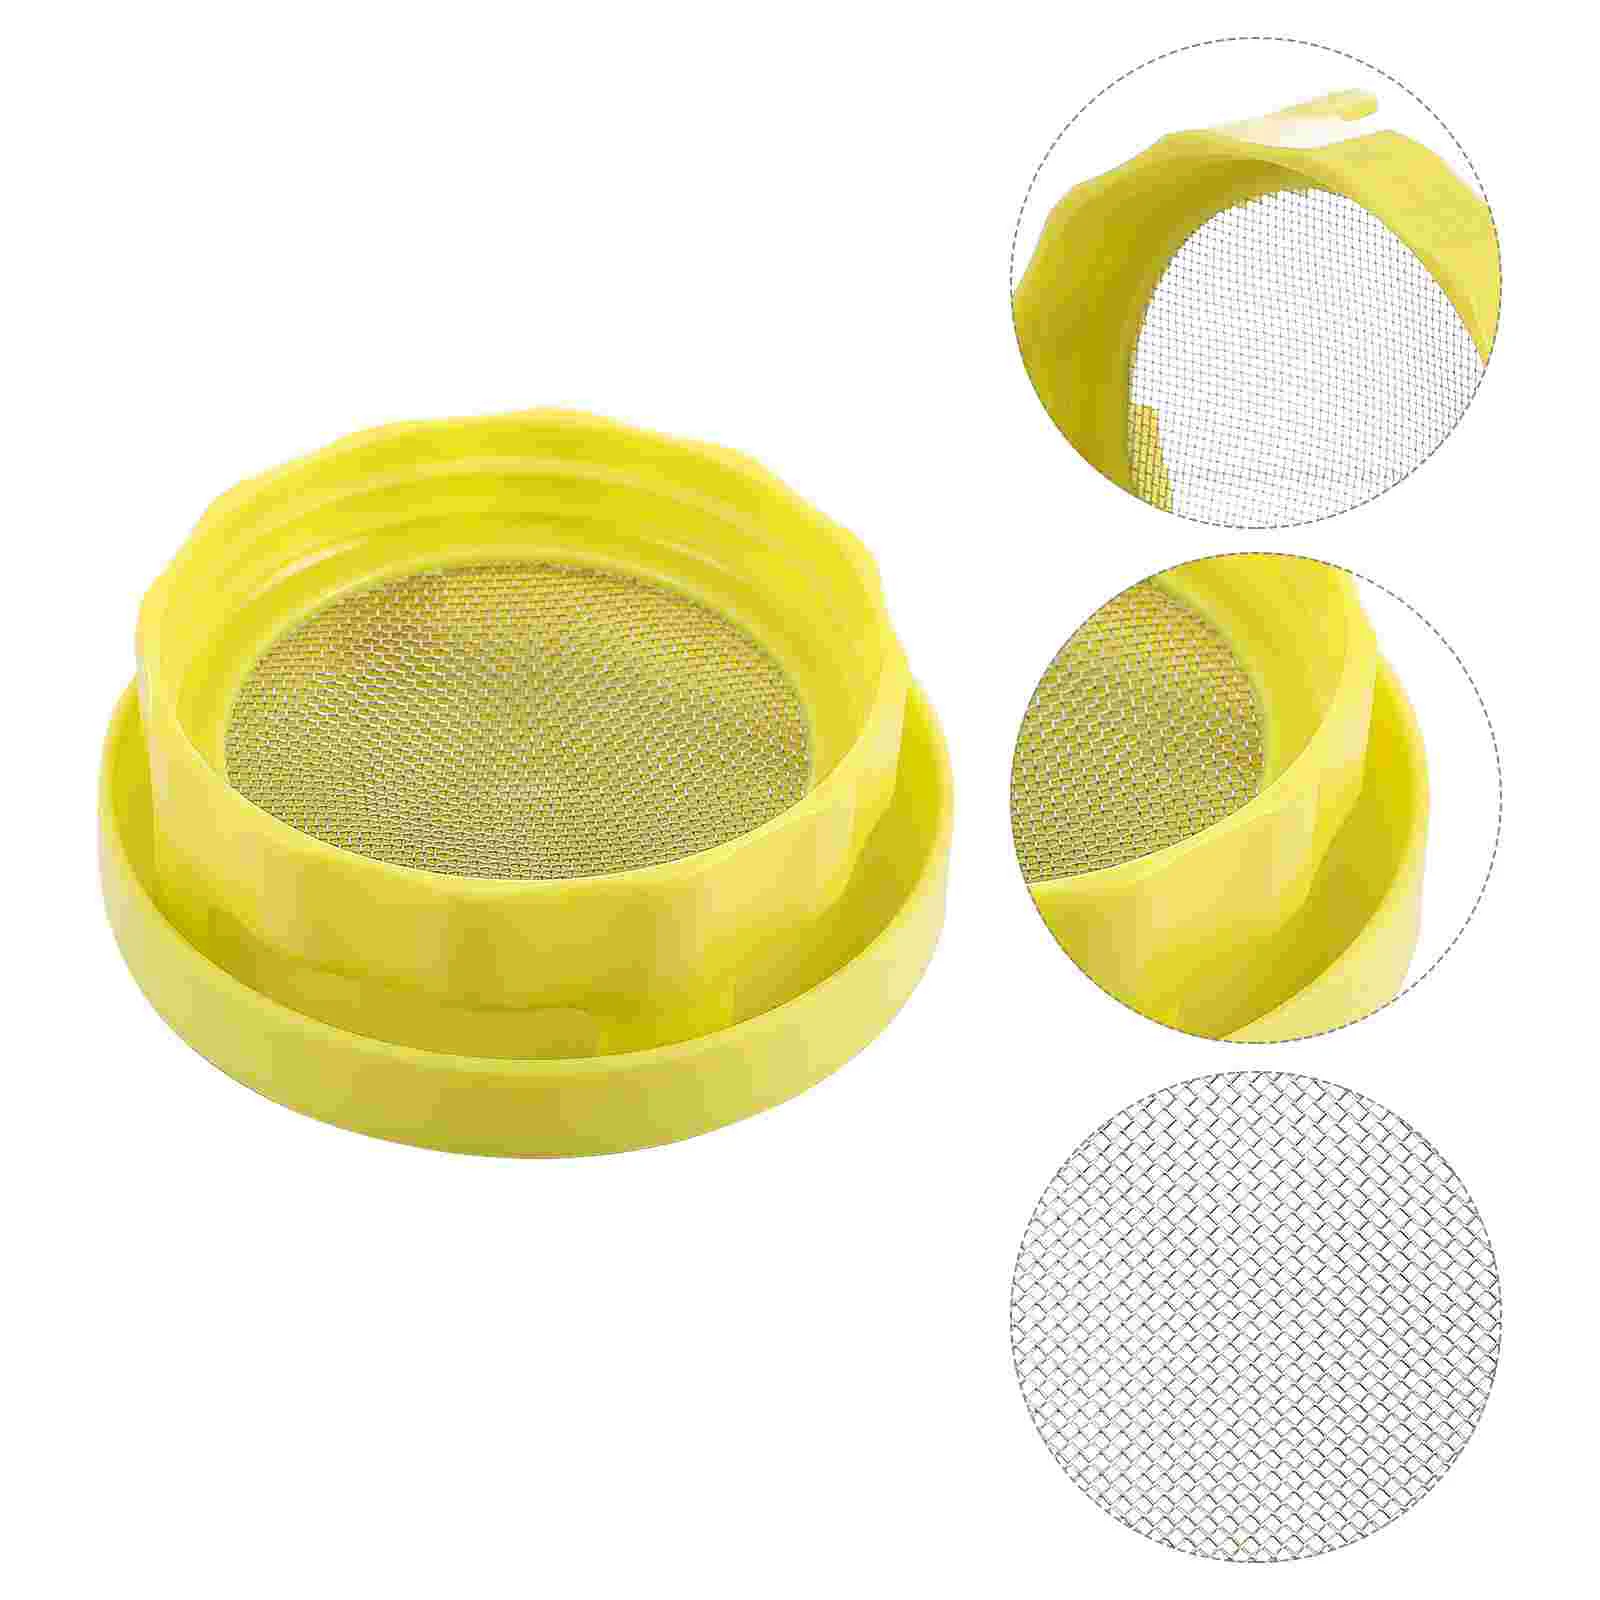 

Sprouting Jar Lids Lid Sprouter Mason Screen Sprout Kit Jars Strainer Wide Mouth Bean Mesh Germinator Cover Germination Canning